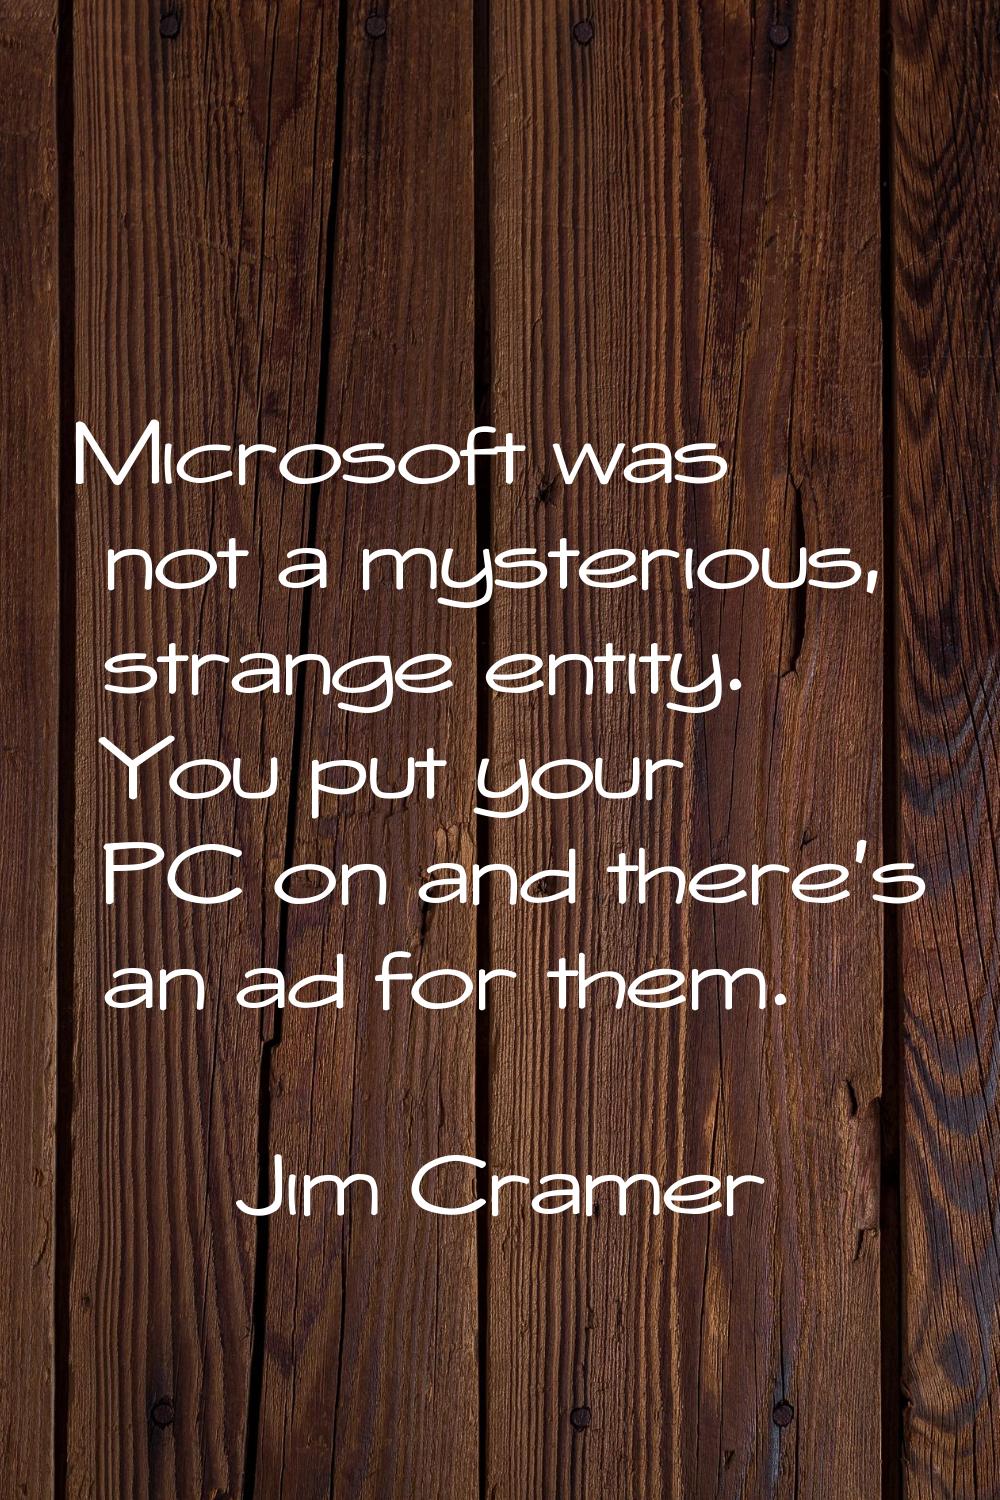 Microsoft was not a mysterious, strange entity. You put your PC on and there's an ad for them.